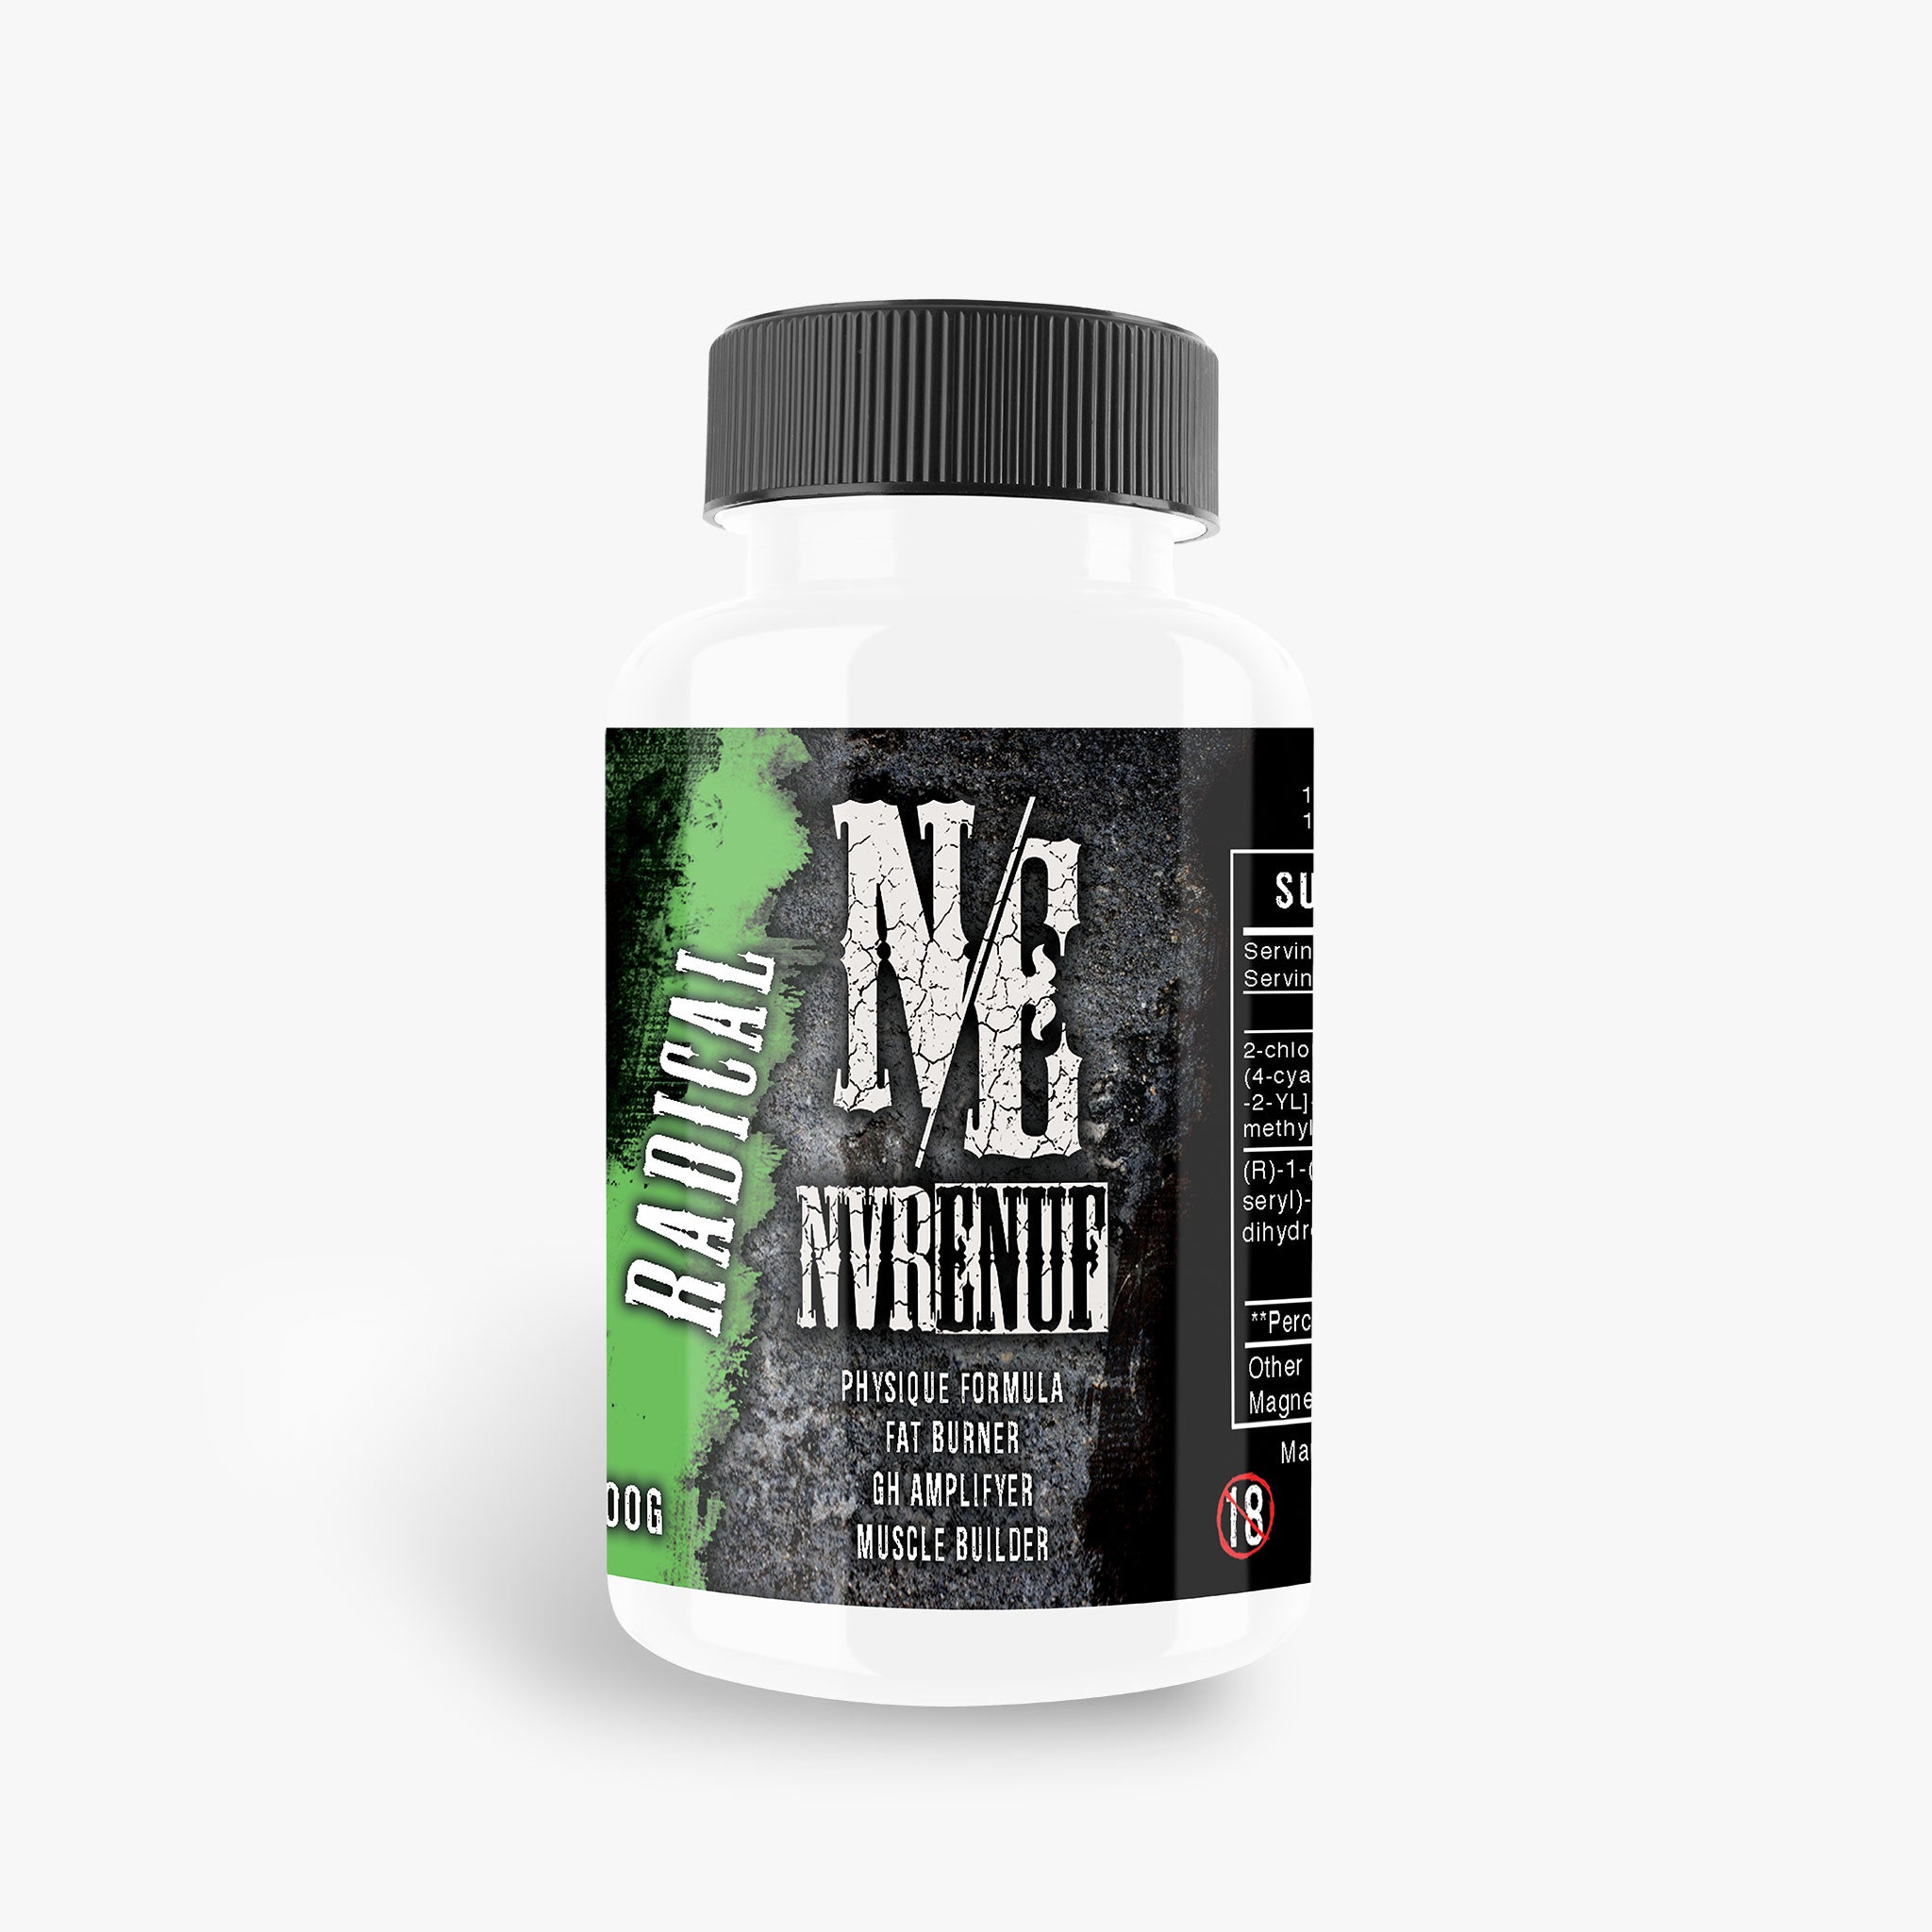 RADICAL - Ultimate Physique SARM's Compound by NVRENUF Nutrition